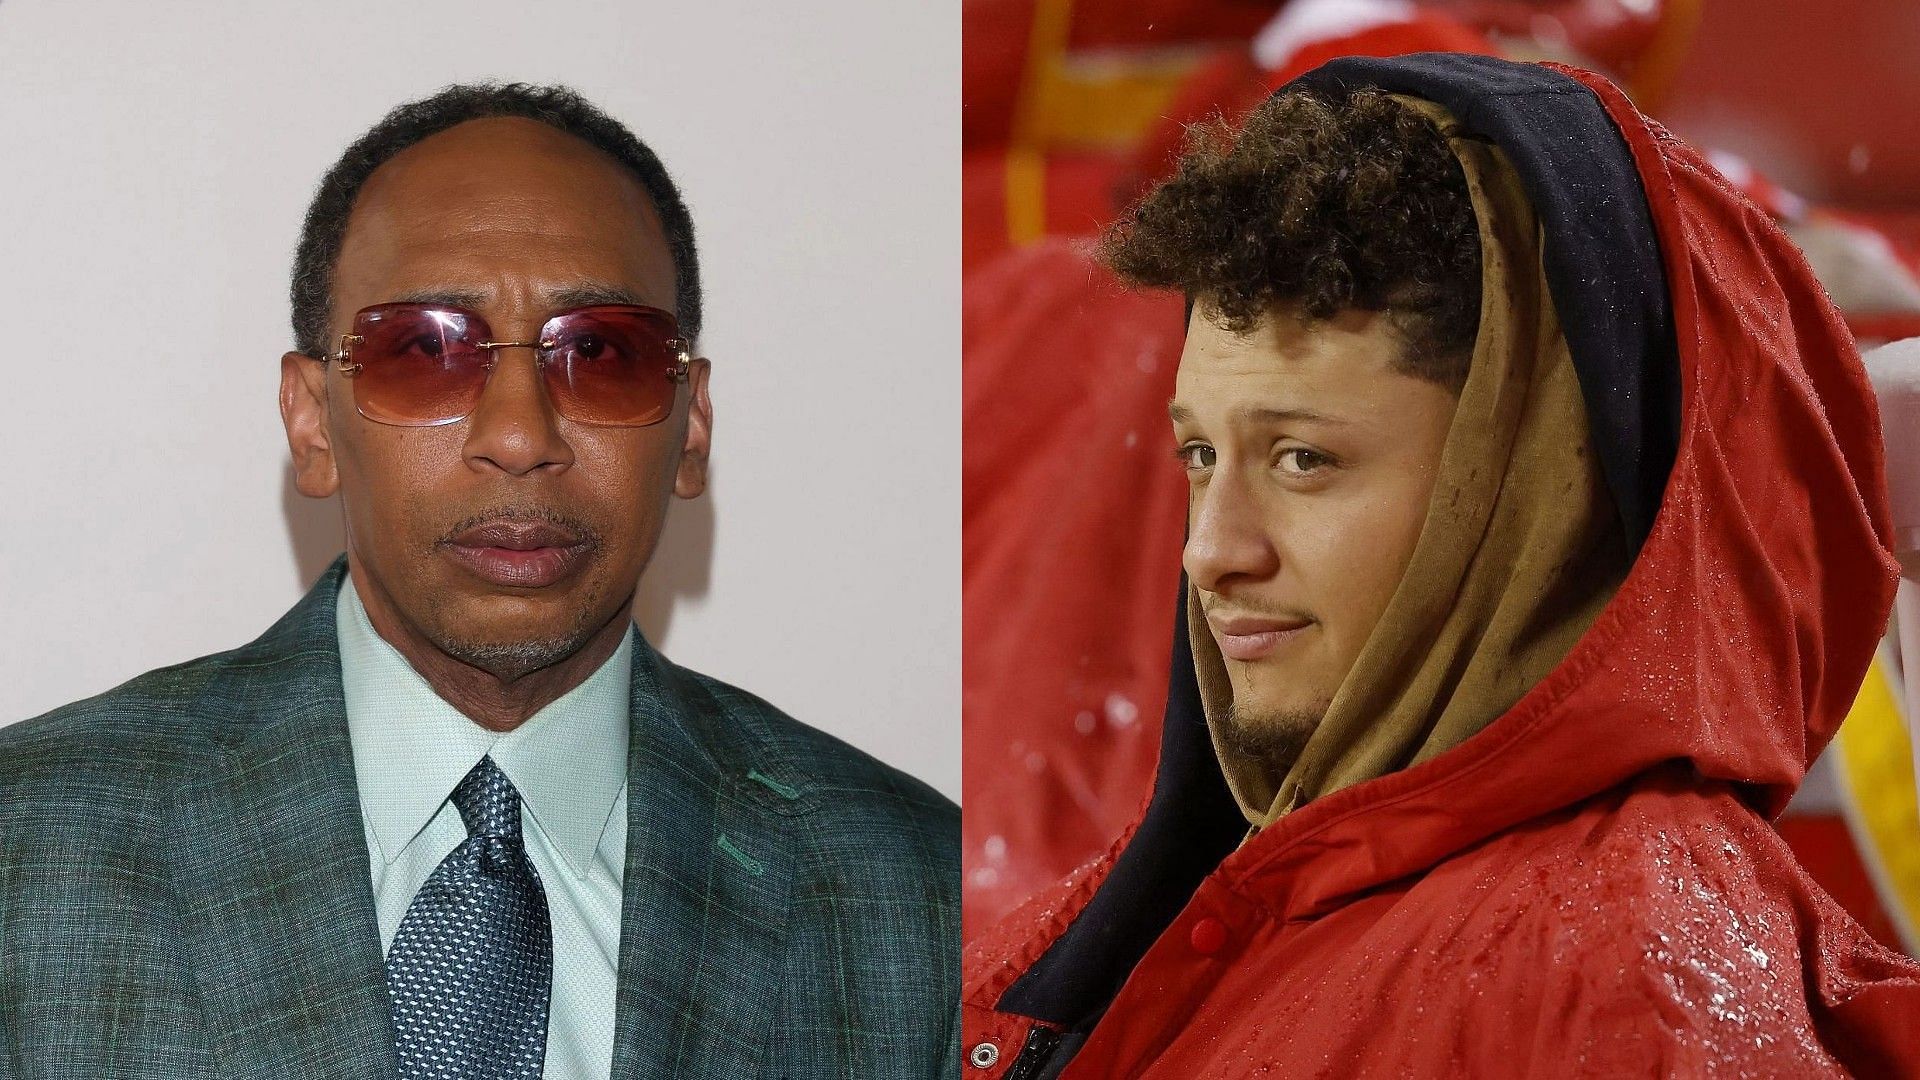 Stephen A. Smith calls Patrick Mahomes&rsquo; offense &ldquo;embarrassing&rdquo; after Monday Night Football collapse